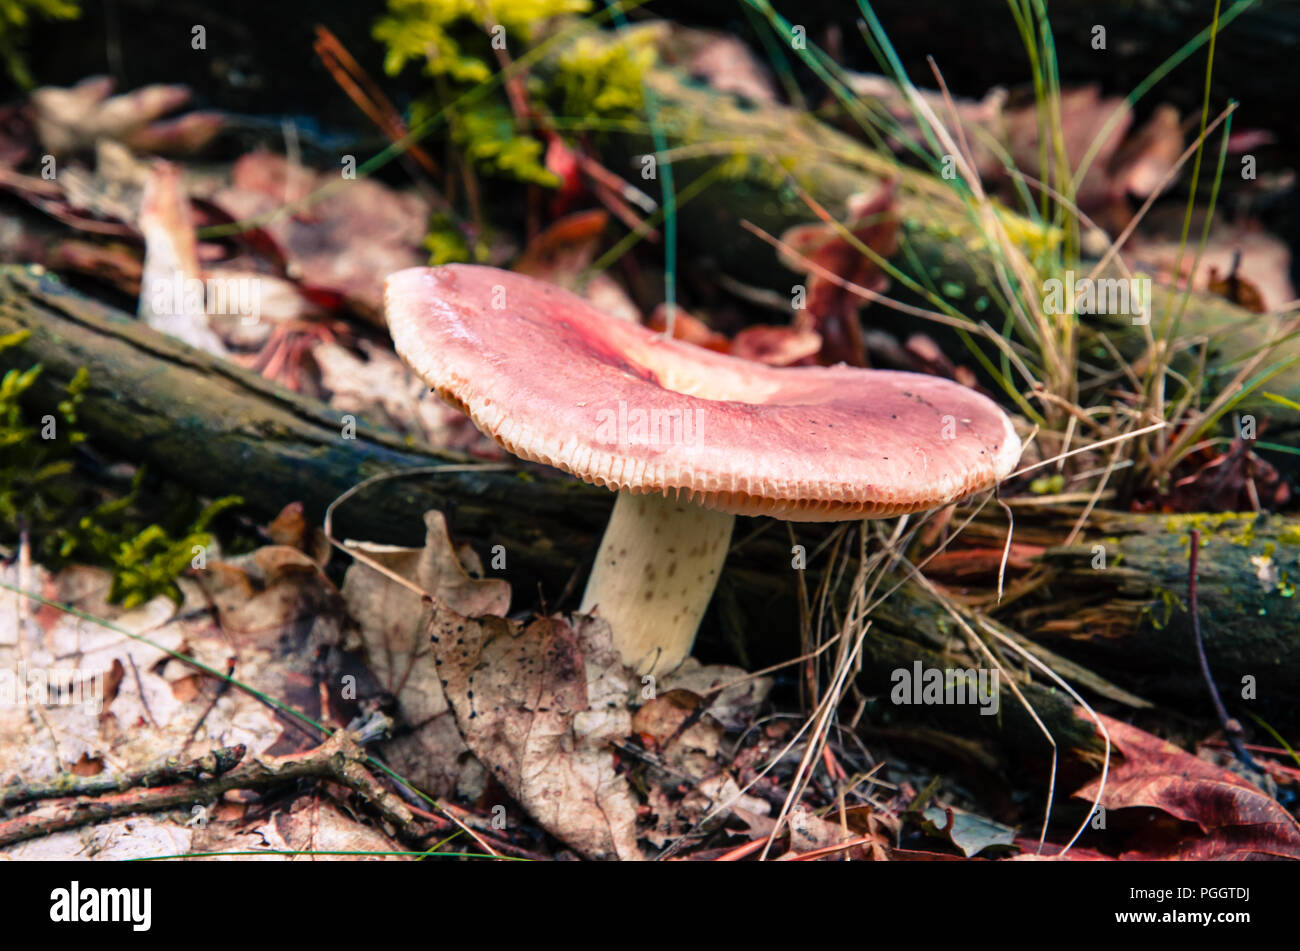 red russula mushroom at autumn time Stock Photo